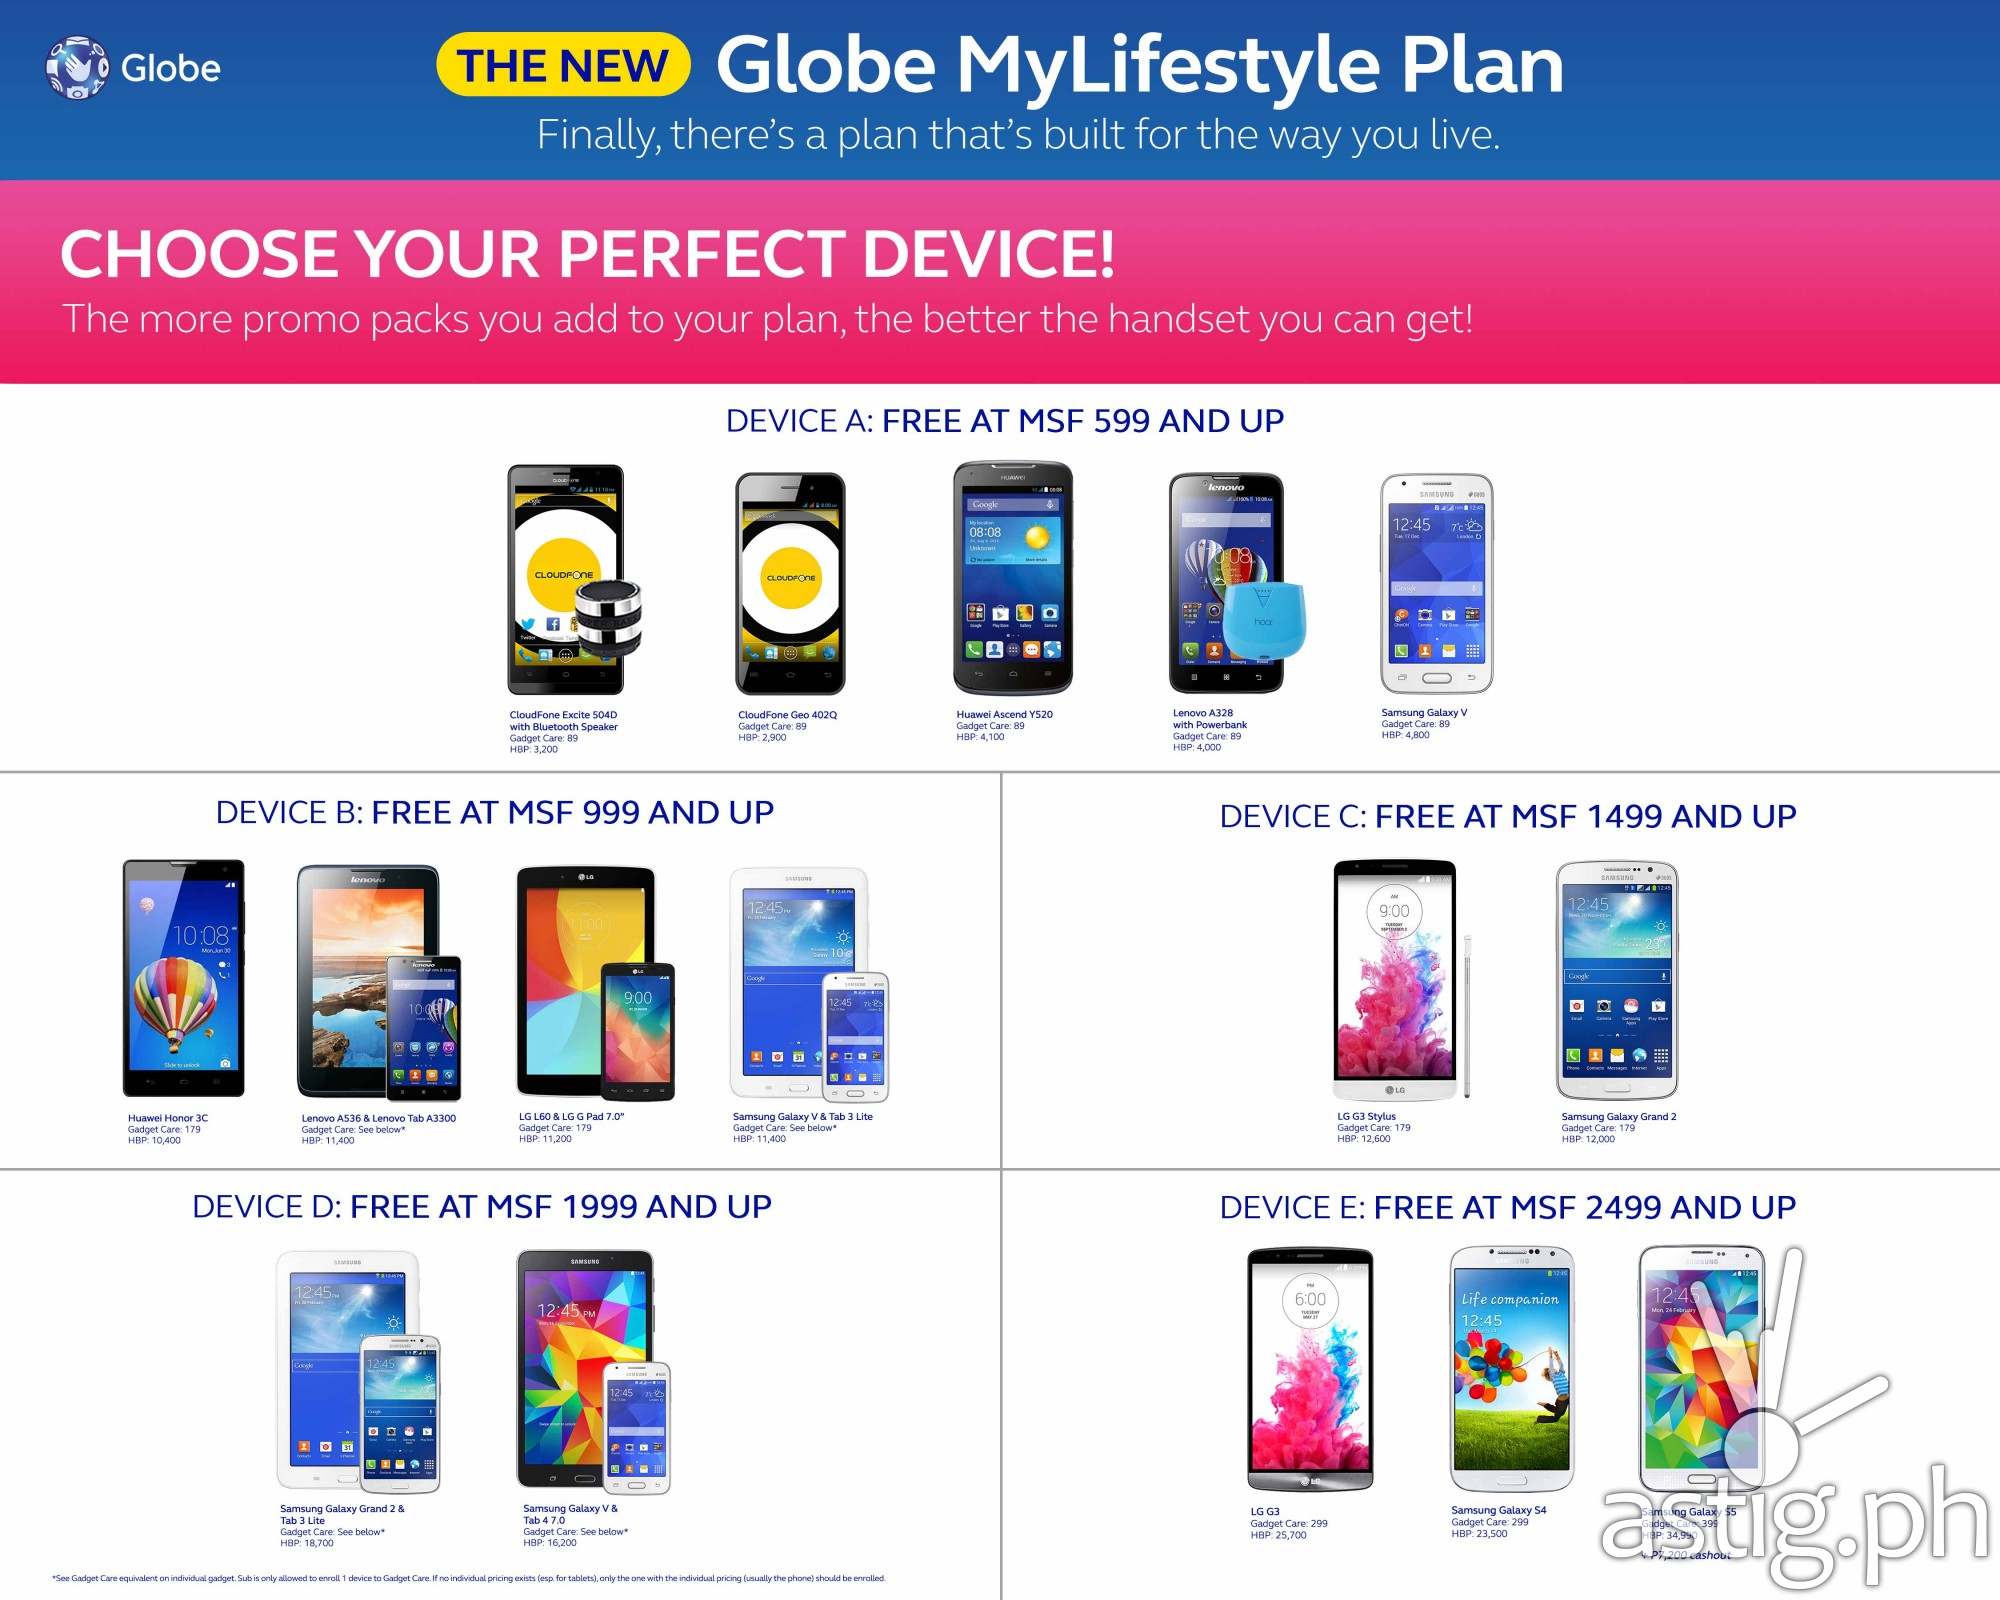 Globe MyLifestyle replaces all postpaid plans at P499 [infographic